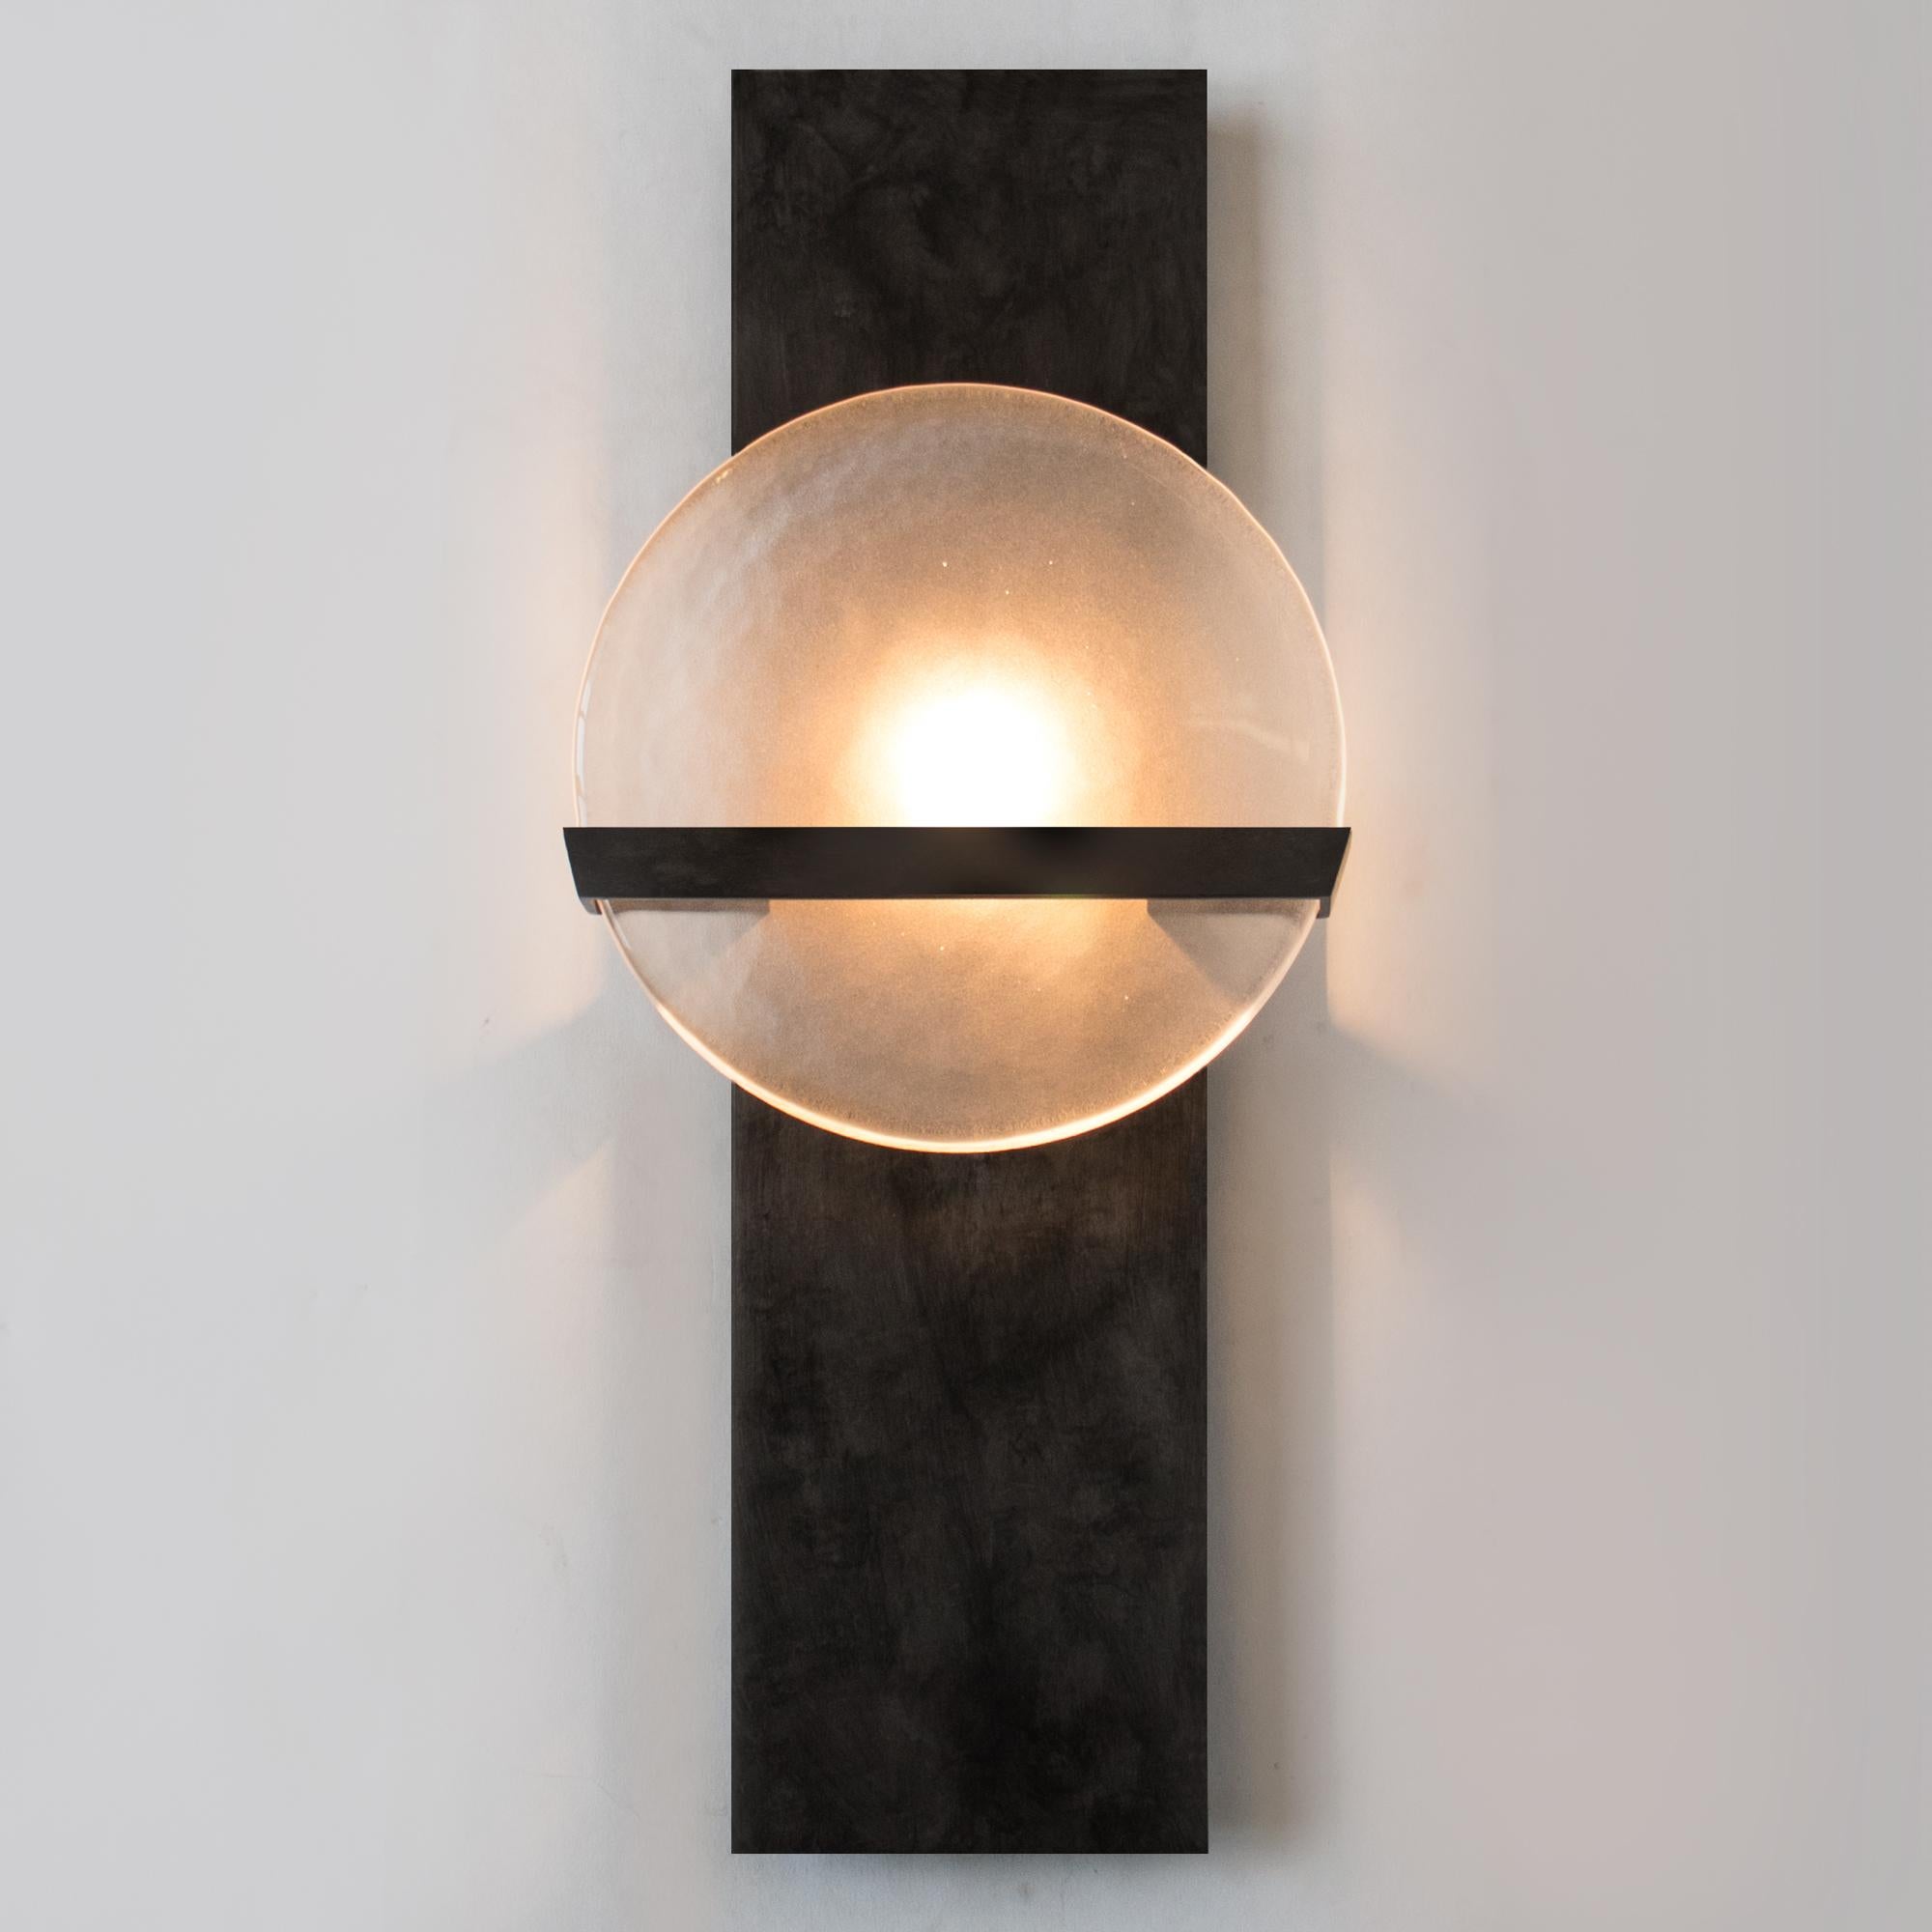 The LUNETTE wall sconce is composed of a cold rolled steel body with a delicate armature projecting a frosted cast glass diffuser. This sconce is available in a variety of plated finishes and cast glass textures. The LUNETTE Wall Sconce is